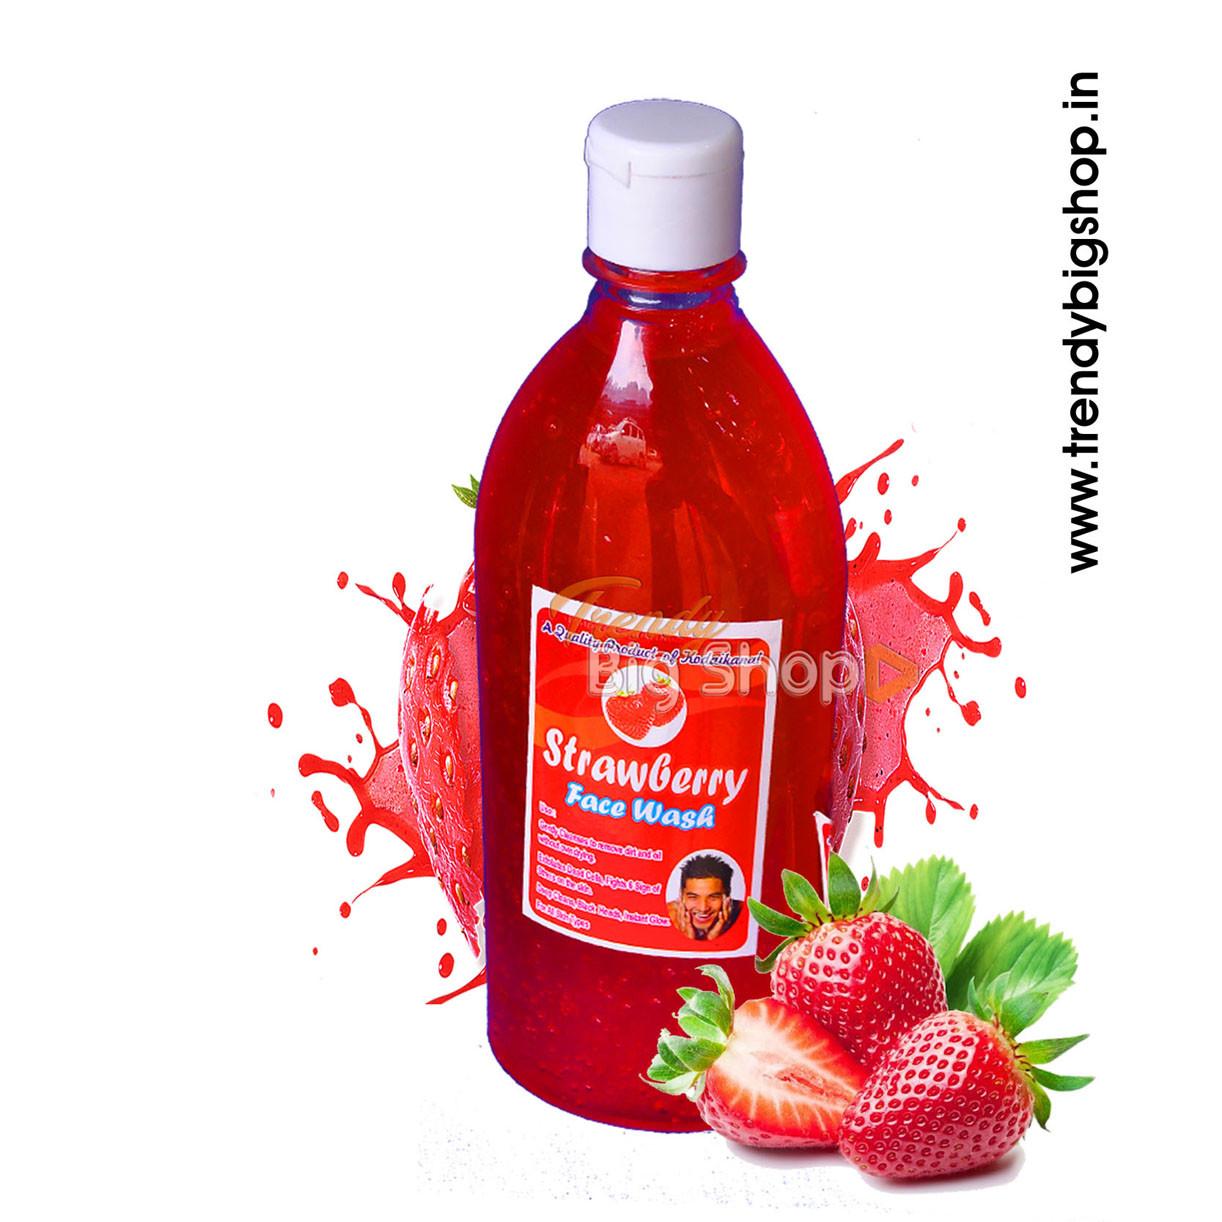 Strawberry Face Wash 200ml, Natural & Pure Strawberry Face Wash Product online shop kodai